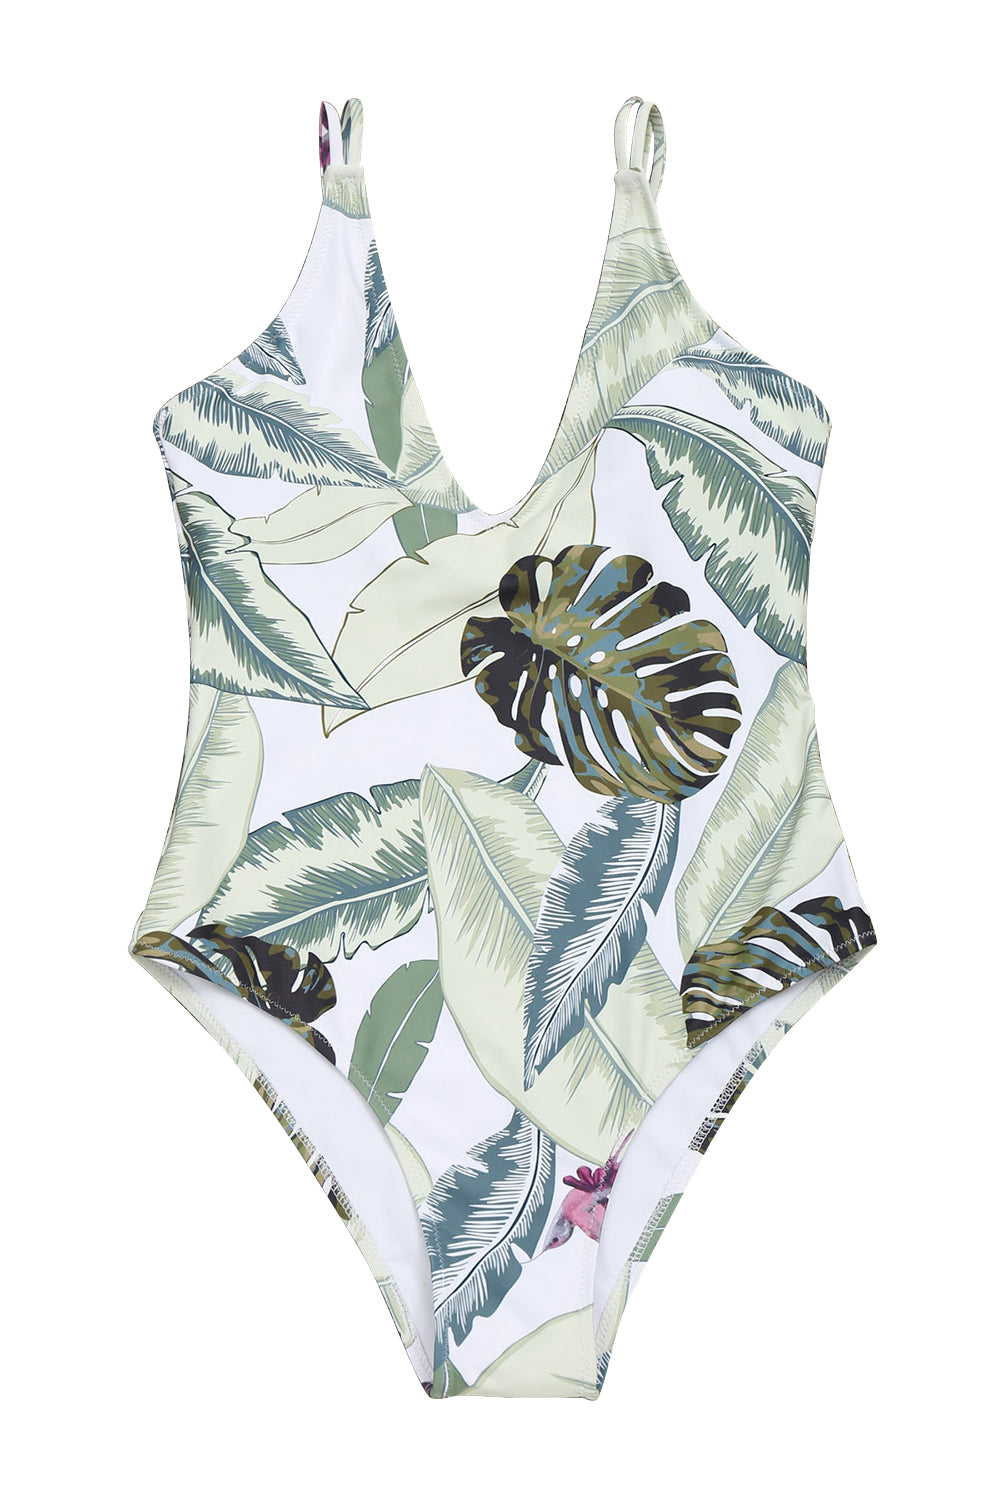 Iyasson Light Green Leaves Printing Deep V-neck One-piece Swimsuit